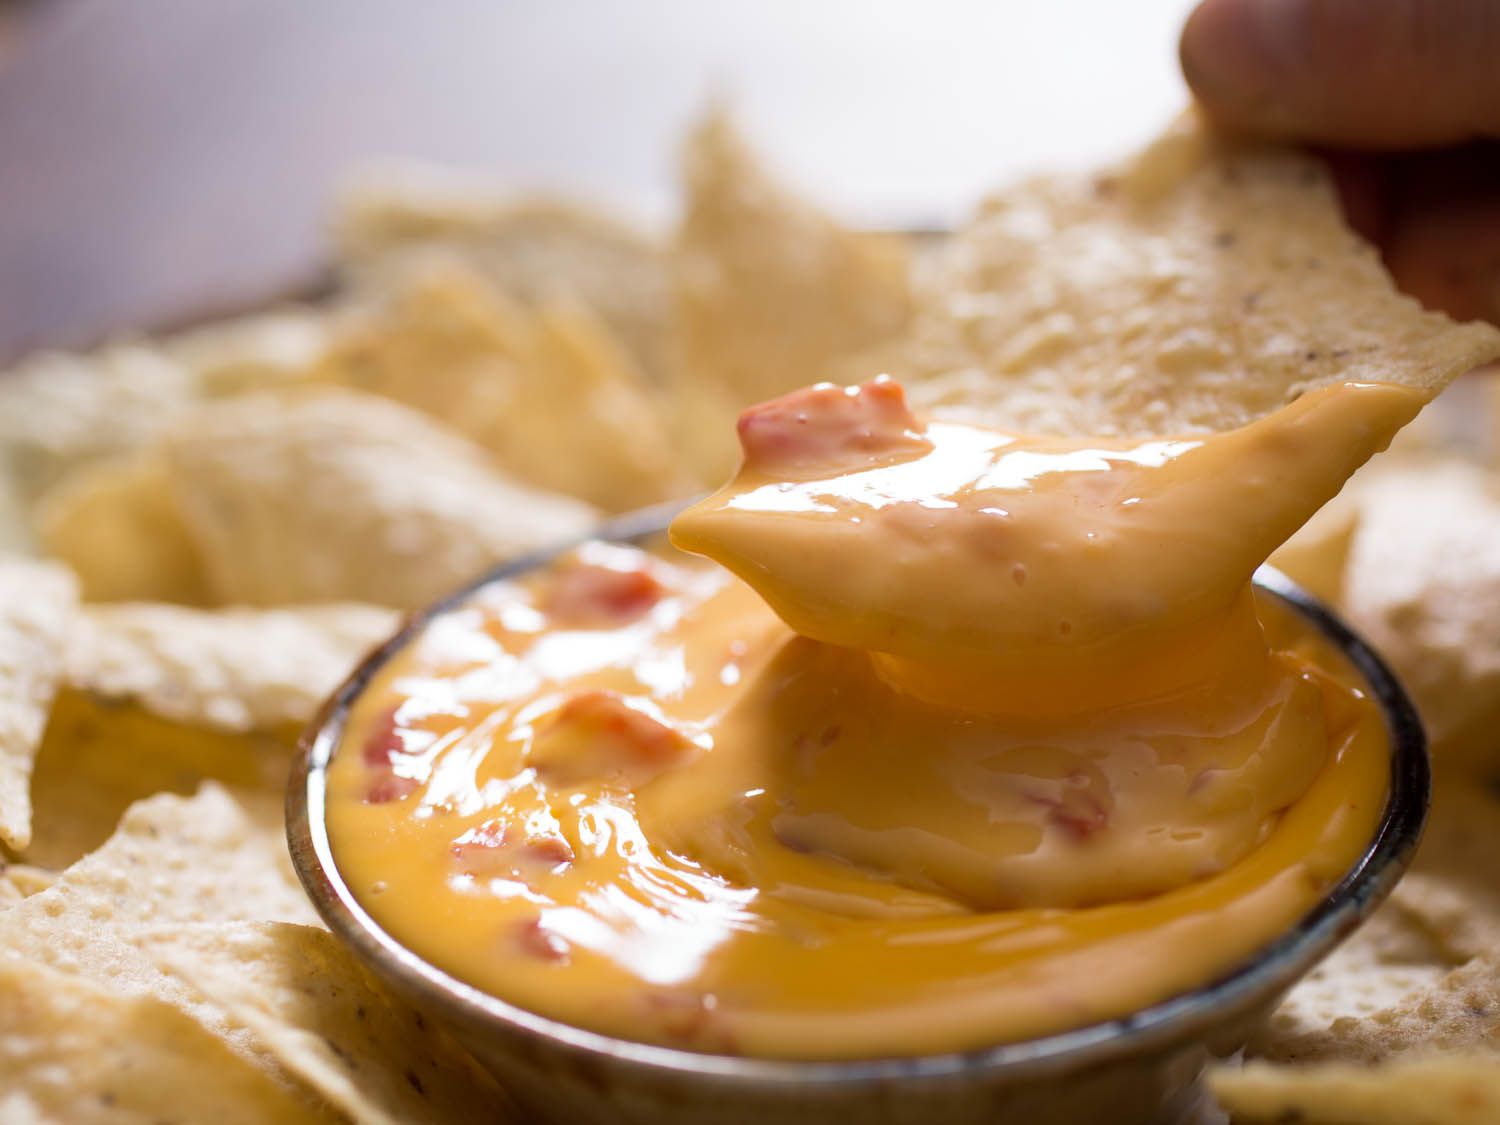 A tortilla chip dipping into Texas-style queso dip, made with process cheese.